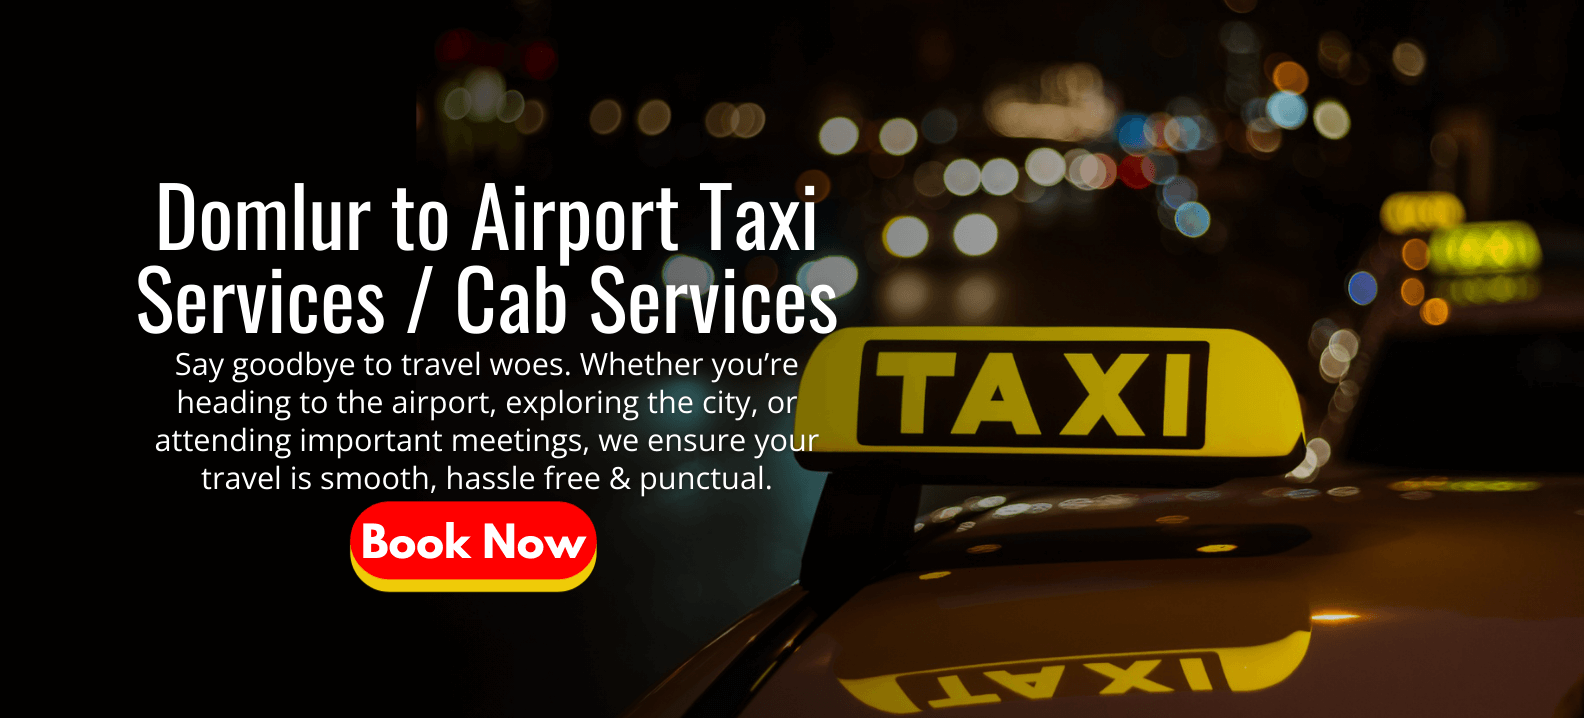 Domlur to Airport Taxi Services _ Cab Services